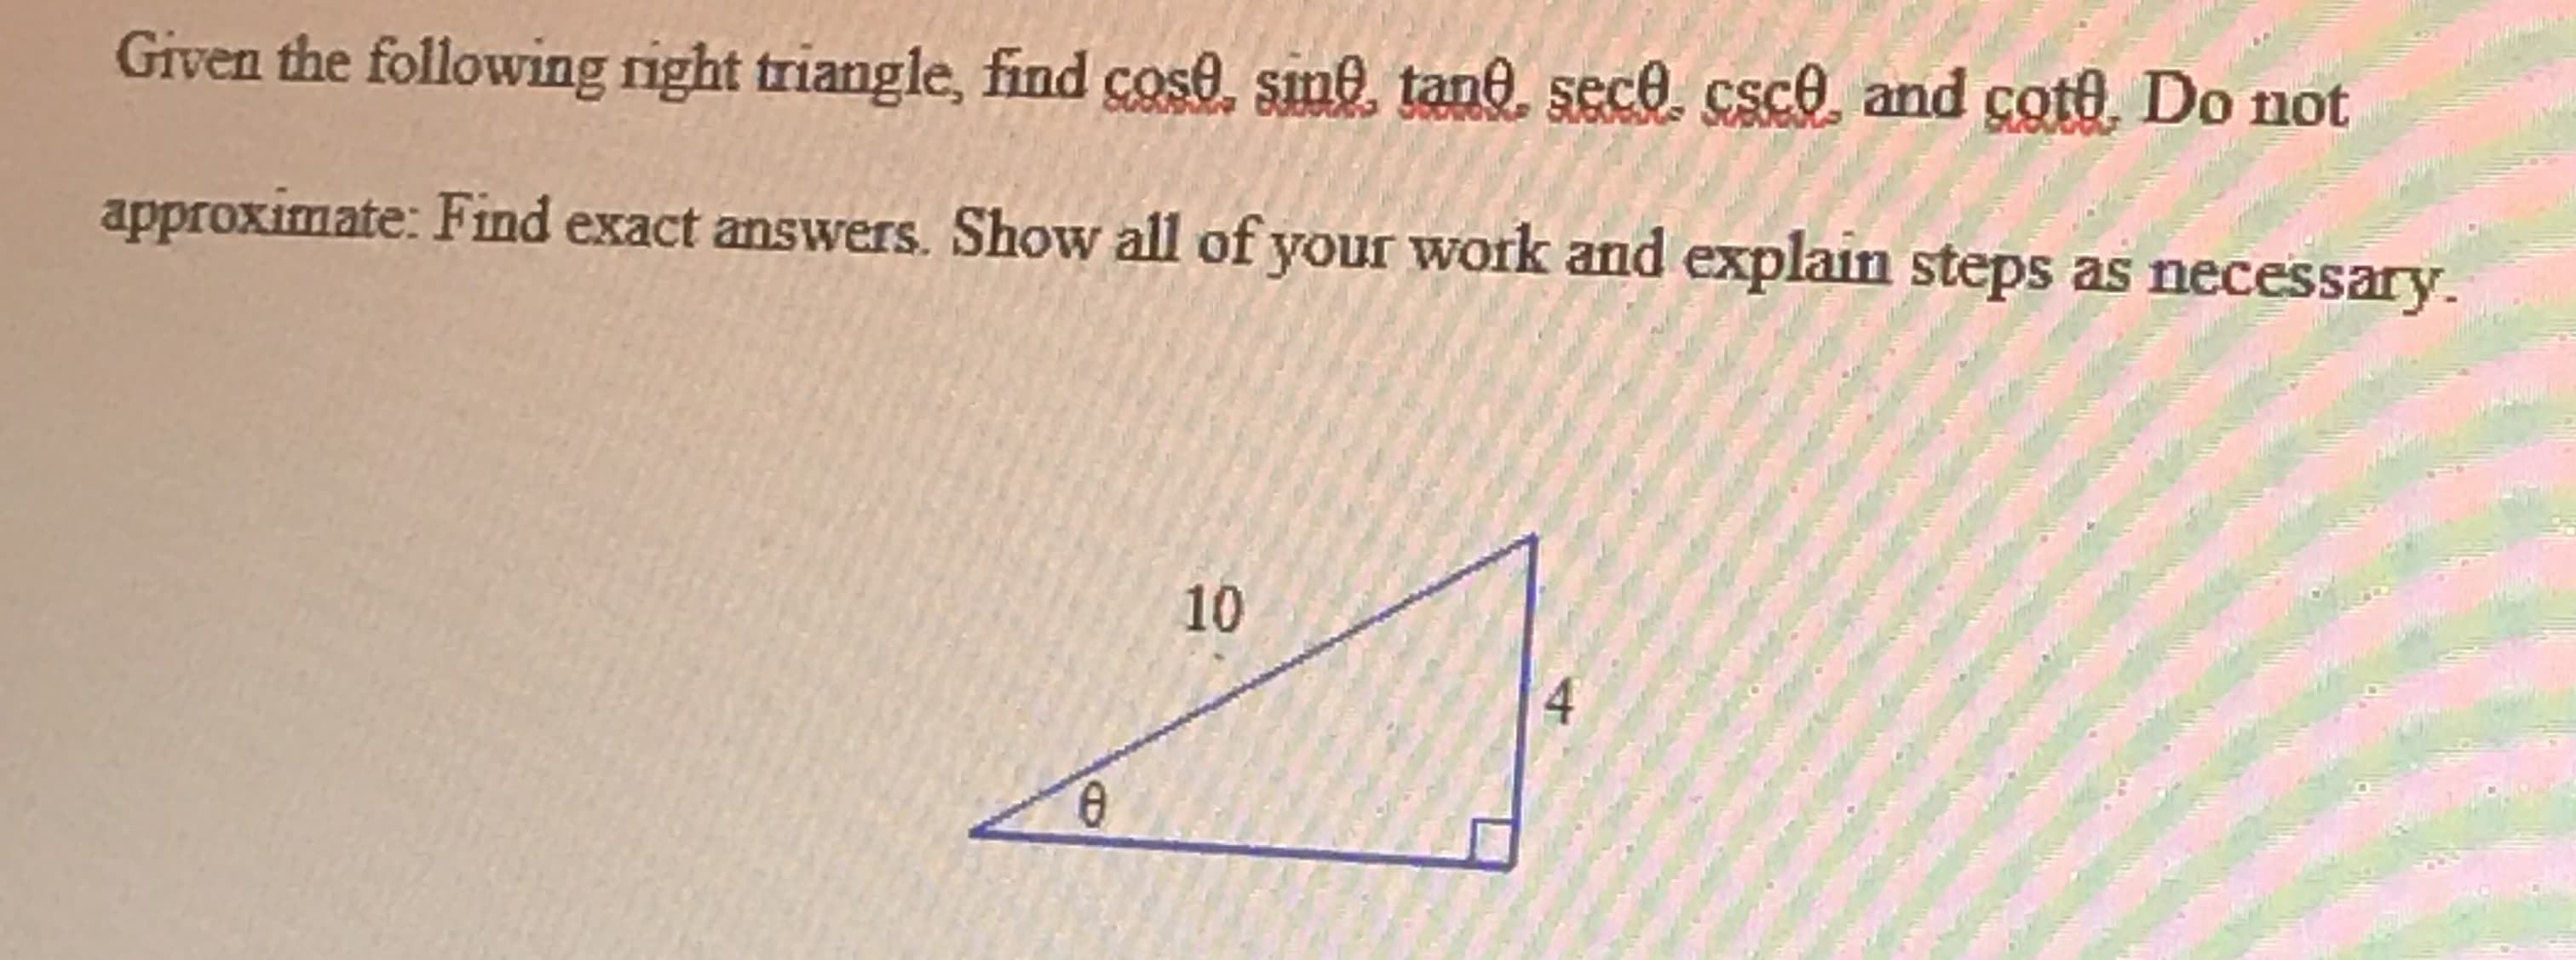 Given the following right triangle, find cose, sine, tane sece, csce and cote.
